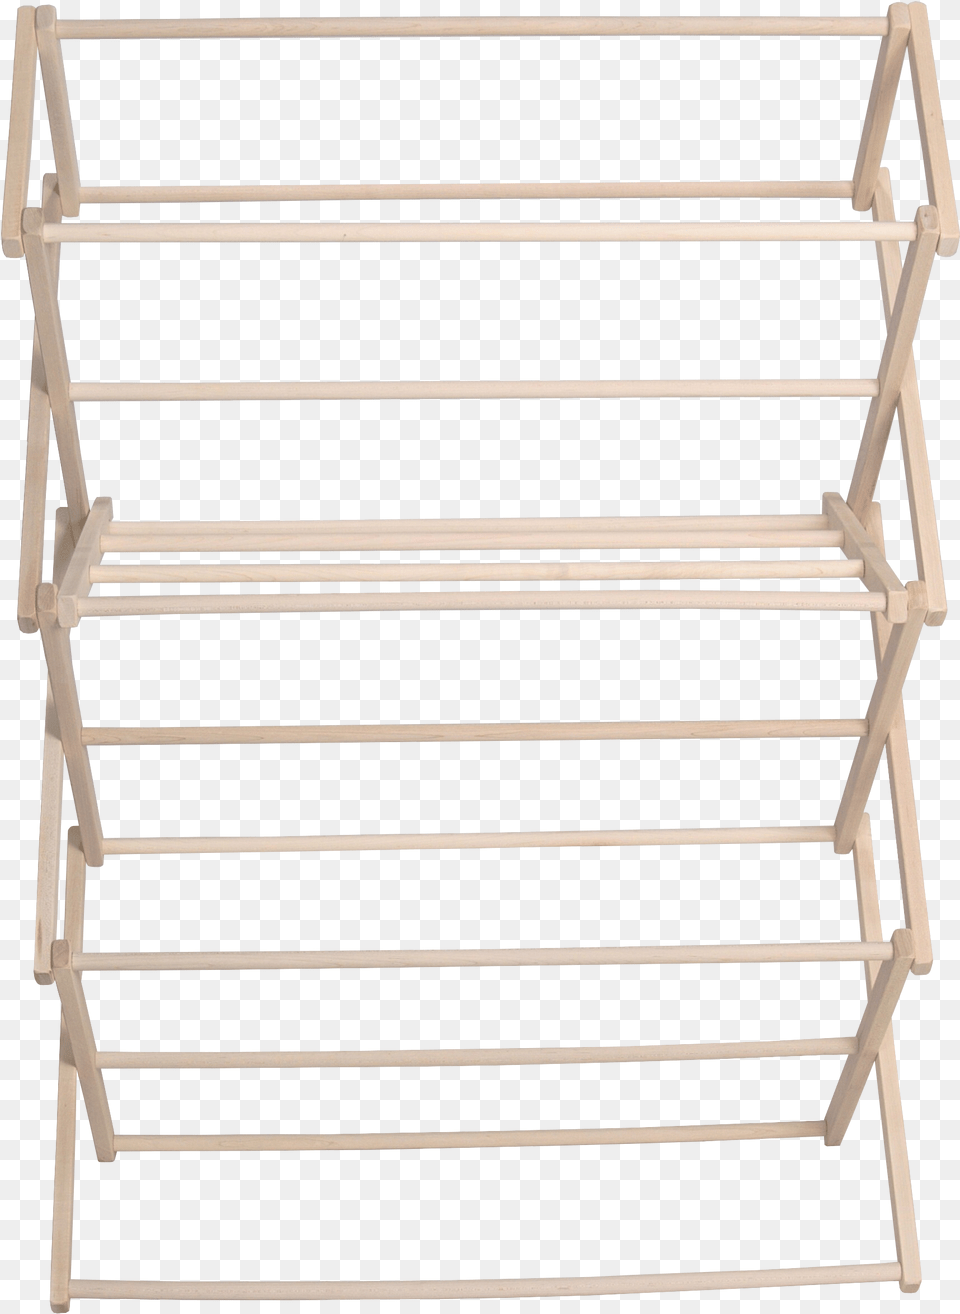 Pennsylvania Woodworks Large Wooden Clothes Drying Shelf, Drying Rack, Crib, Furniture, Infant Bed Free Png Download